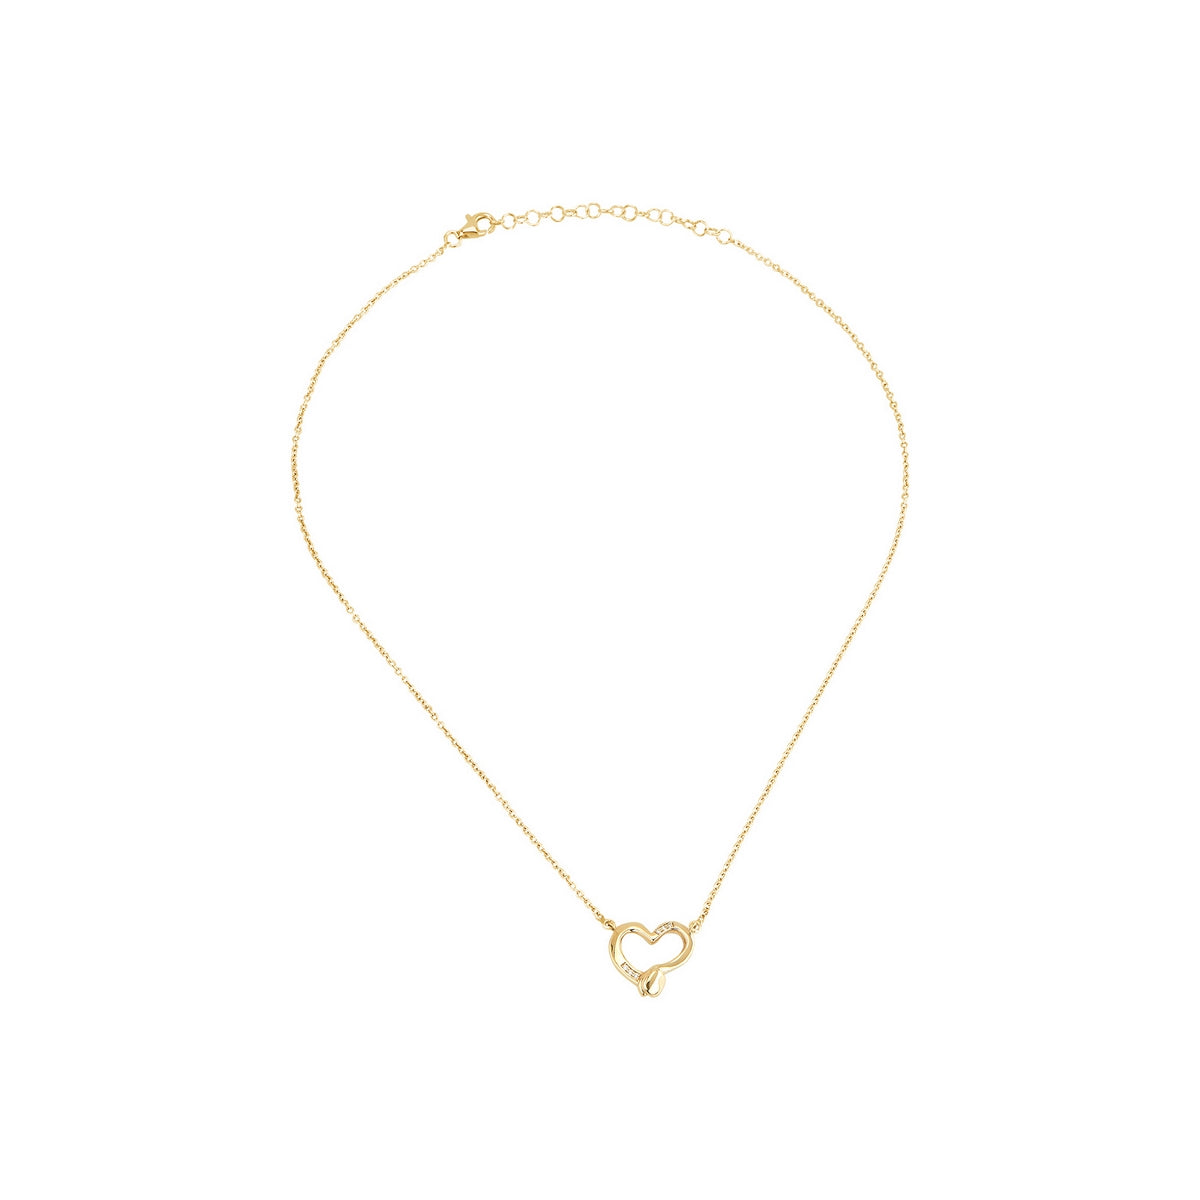 uno de 50 straight to the heart necklace with chain and heart nailed in gold-plated metal alloy and white topazes